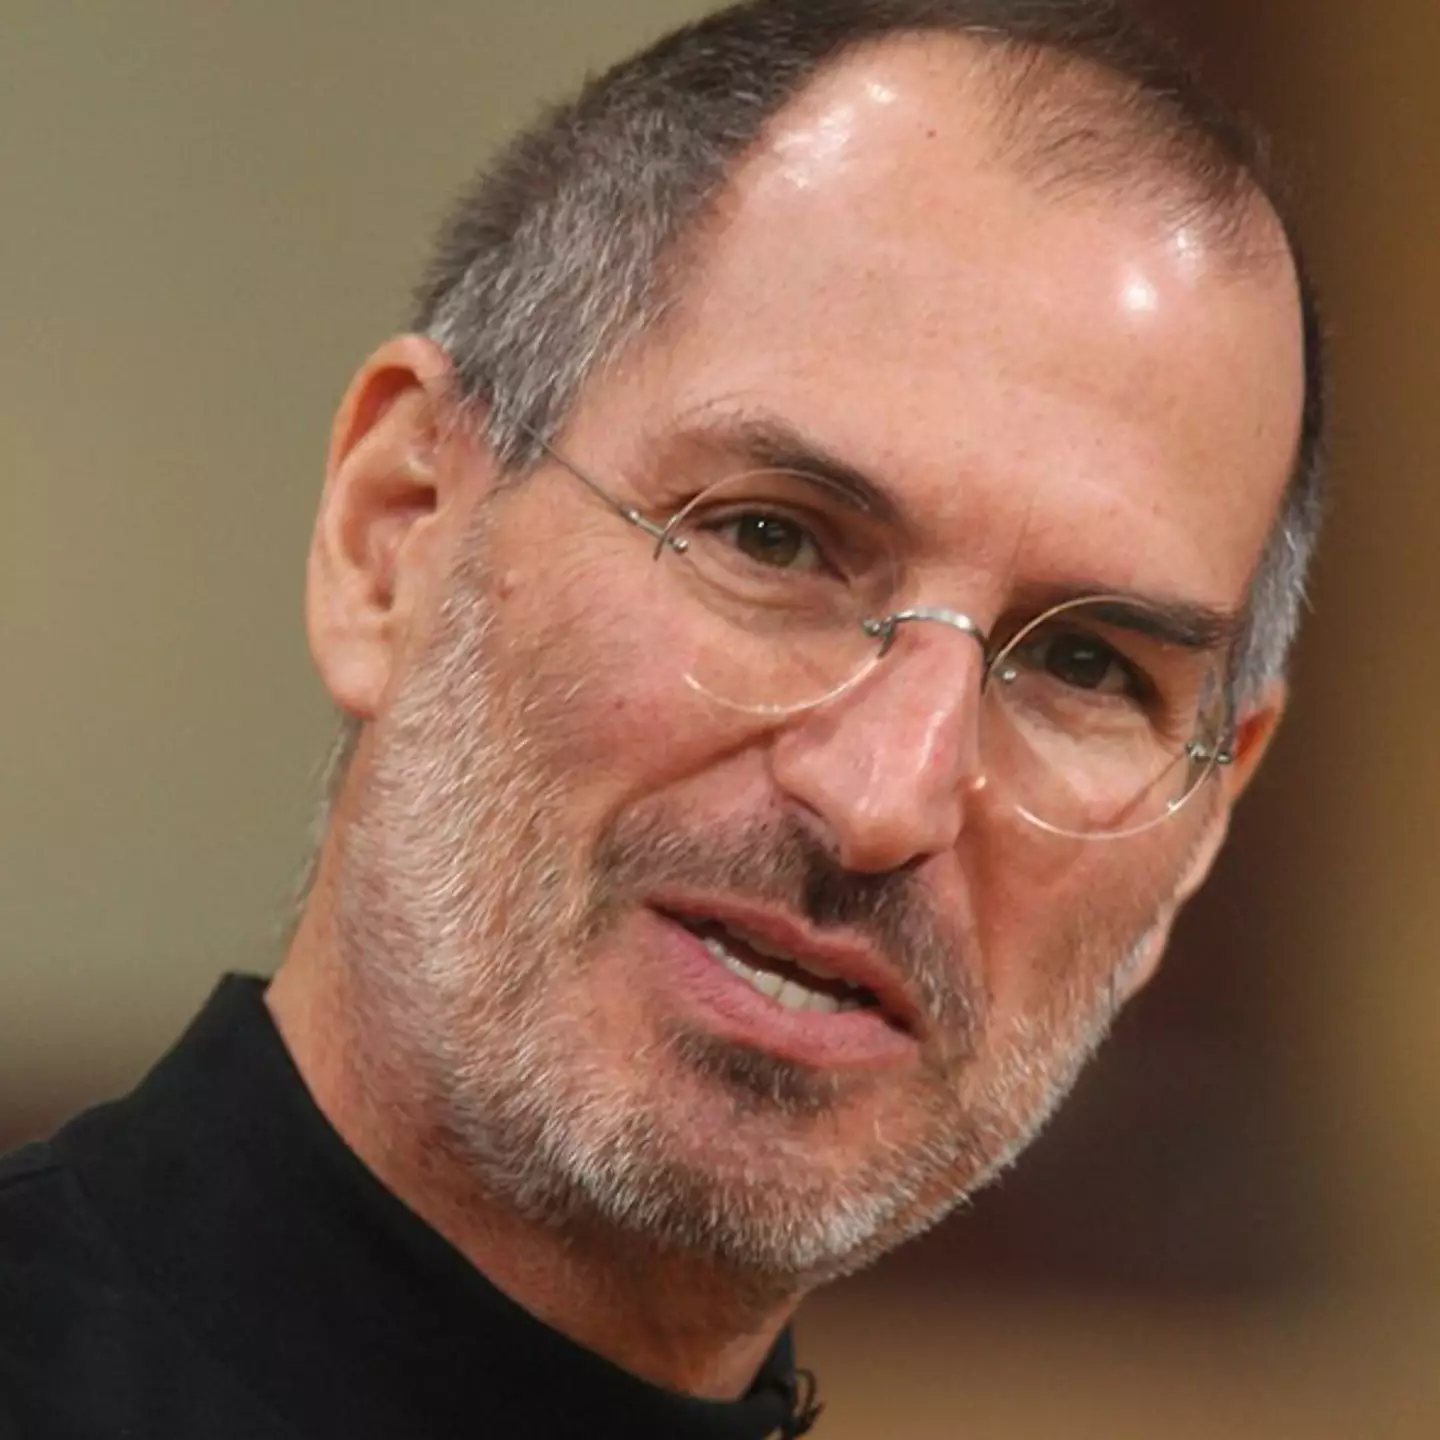 Steve Jobs asked one question over and over again because he believed it was so powerful